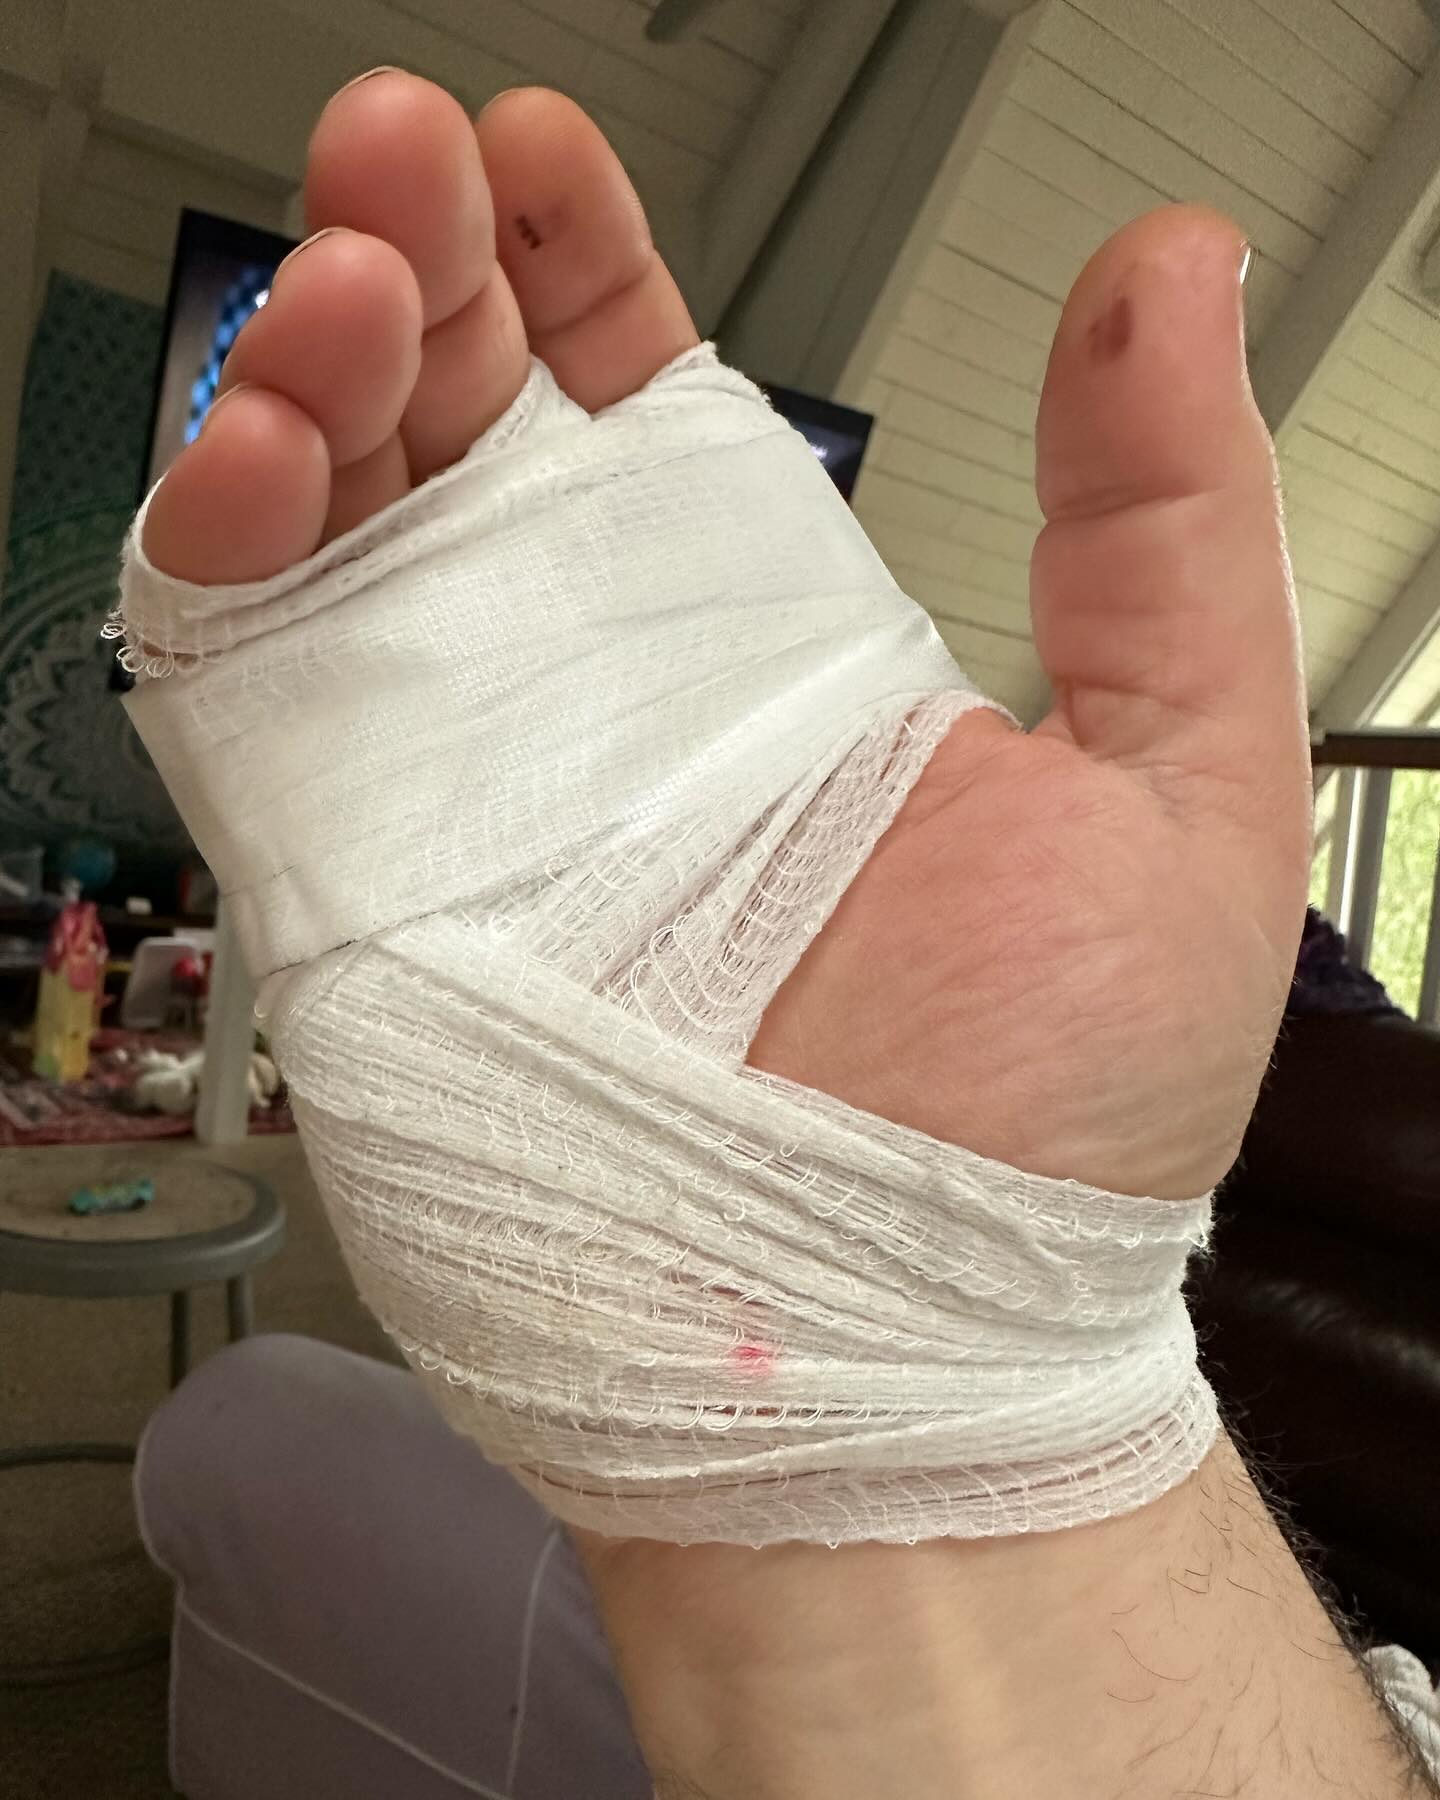 The TV personality and pastry chef revealed he injured his hand in the crash